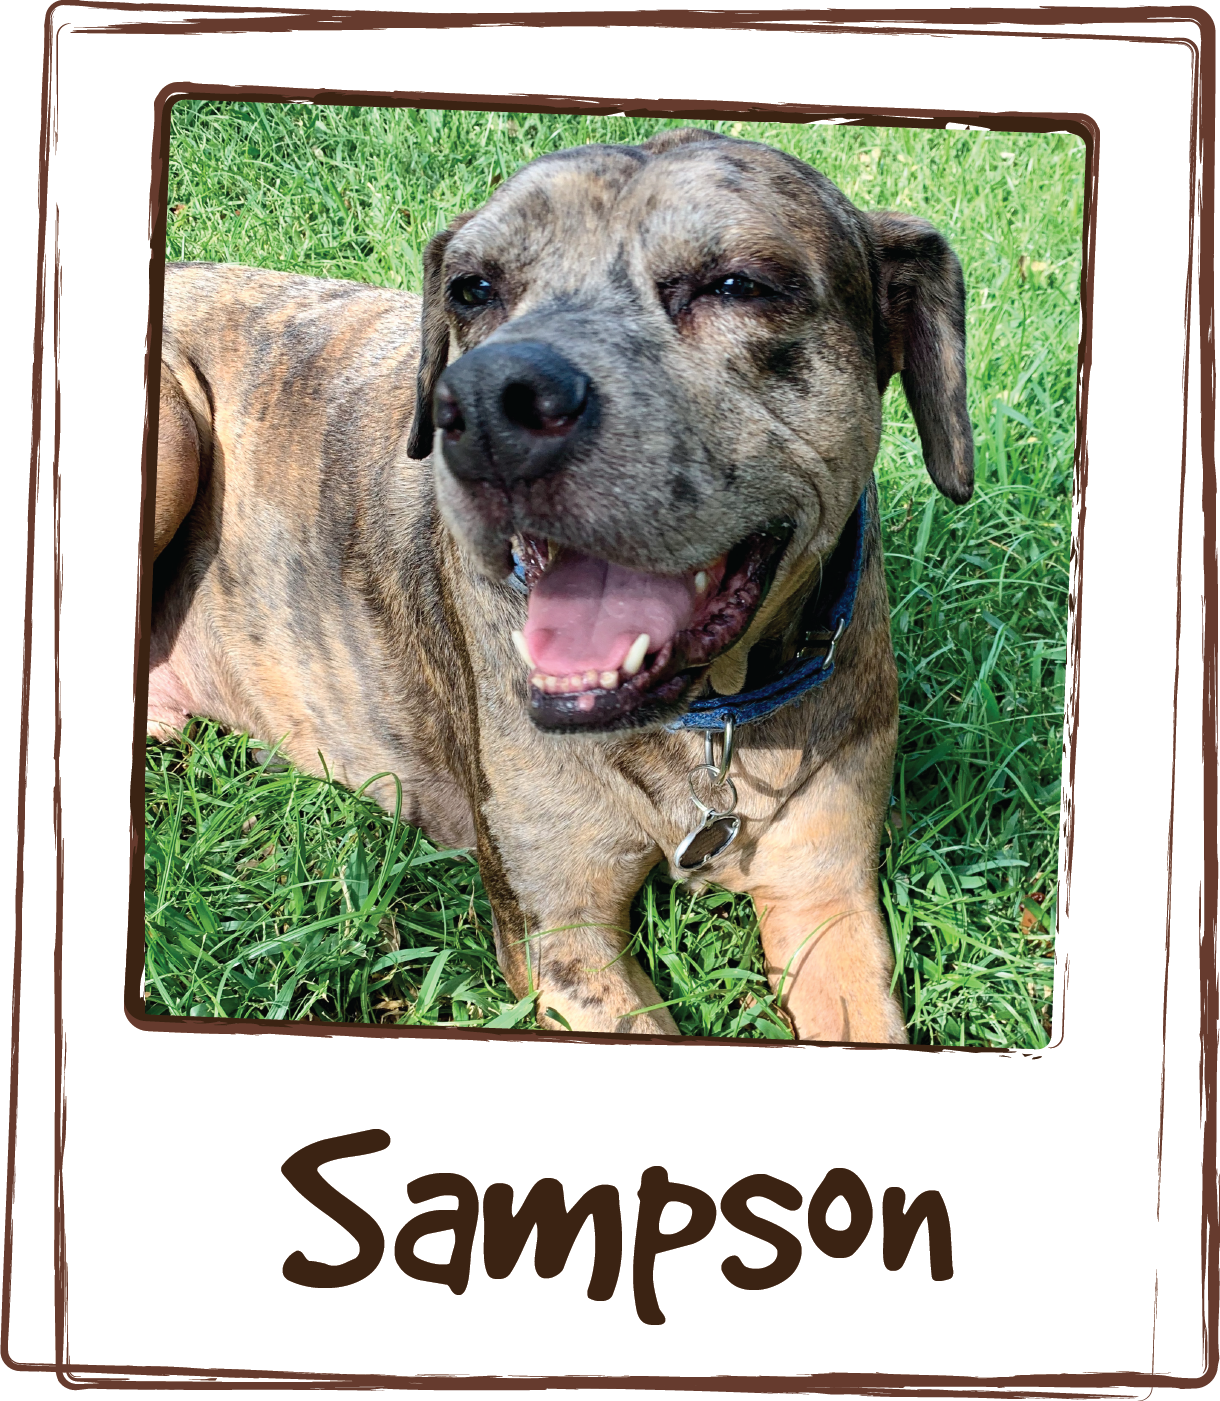  “My sweet Sampson is a rescue dog. He had a rough start in life that left him with some pain from old injuries. At only 6, he was getting arthritis more and more frequently. I was given carprofen to help when it was really bad but I was worried abou